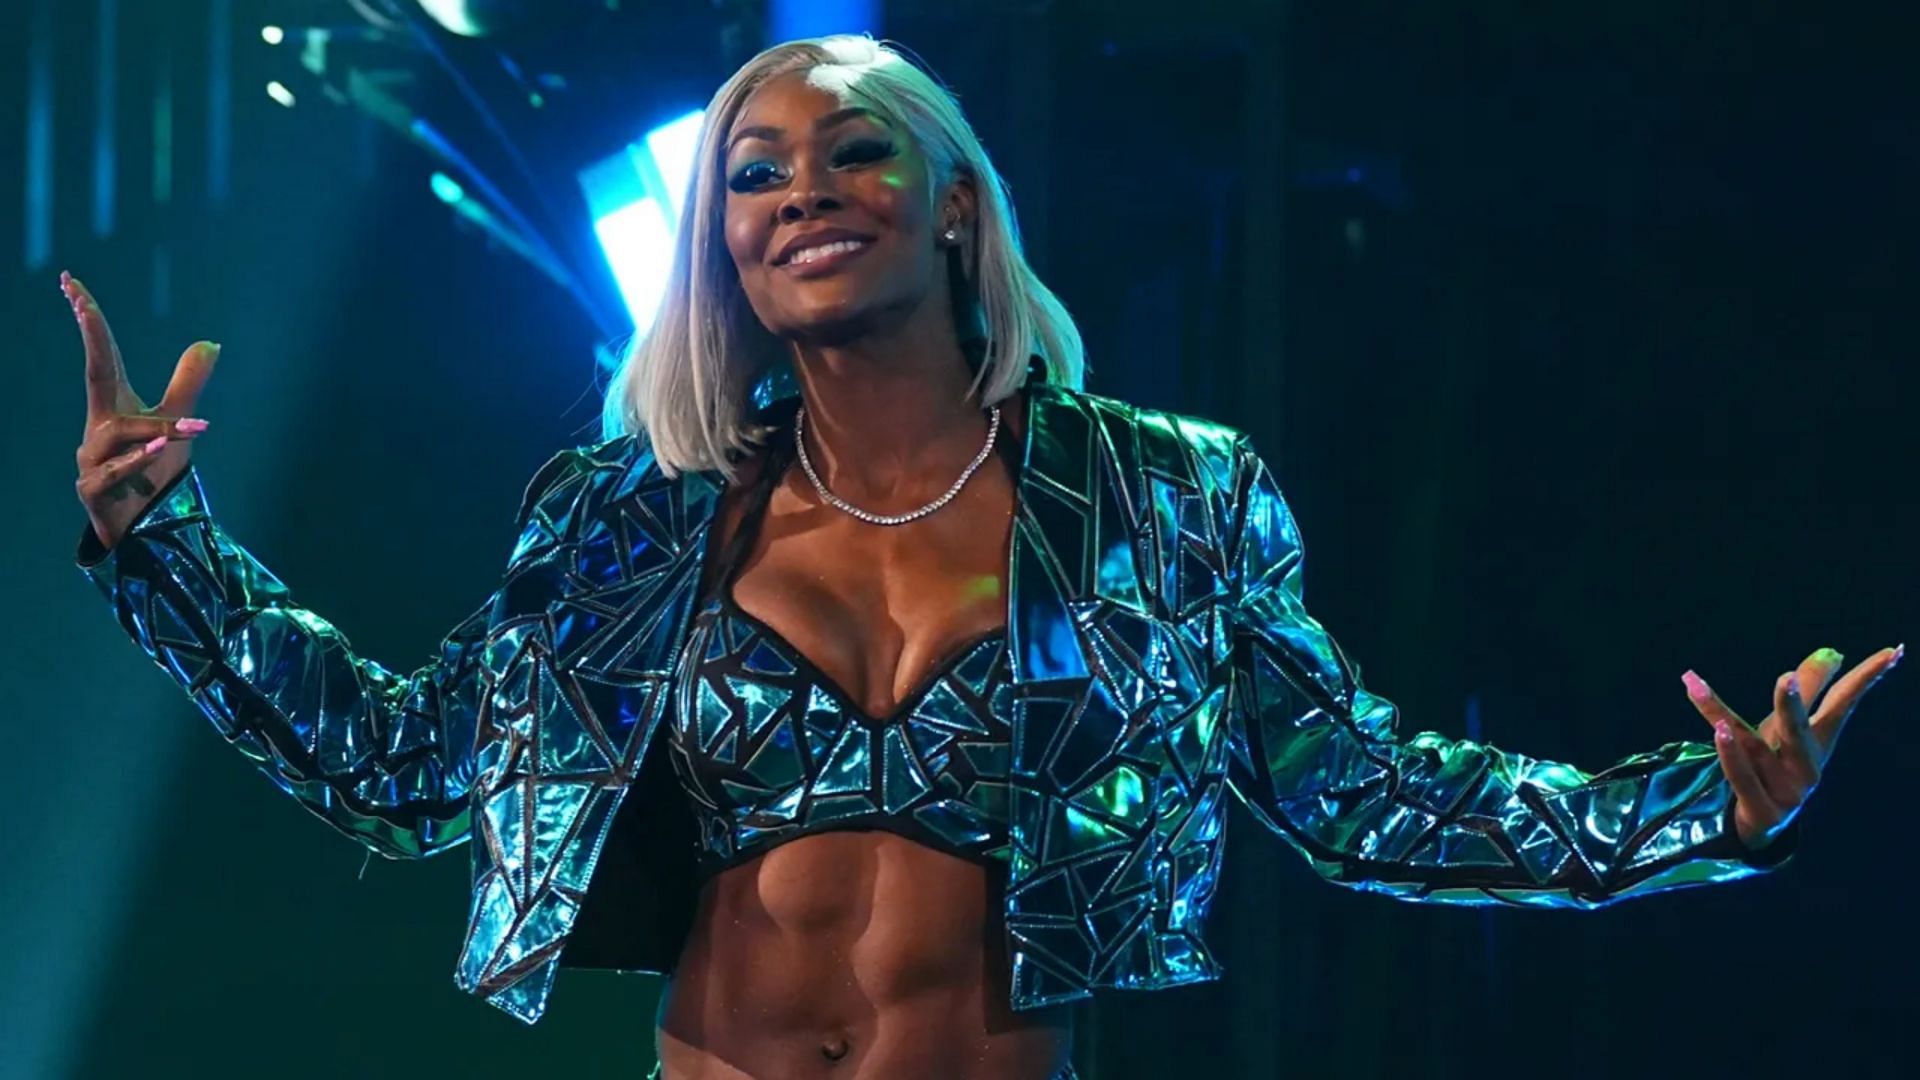 Jade Cargill joined WWE after leaving AEW